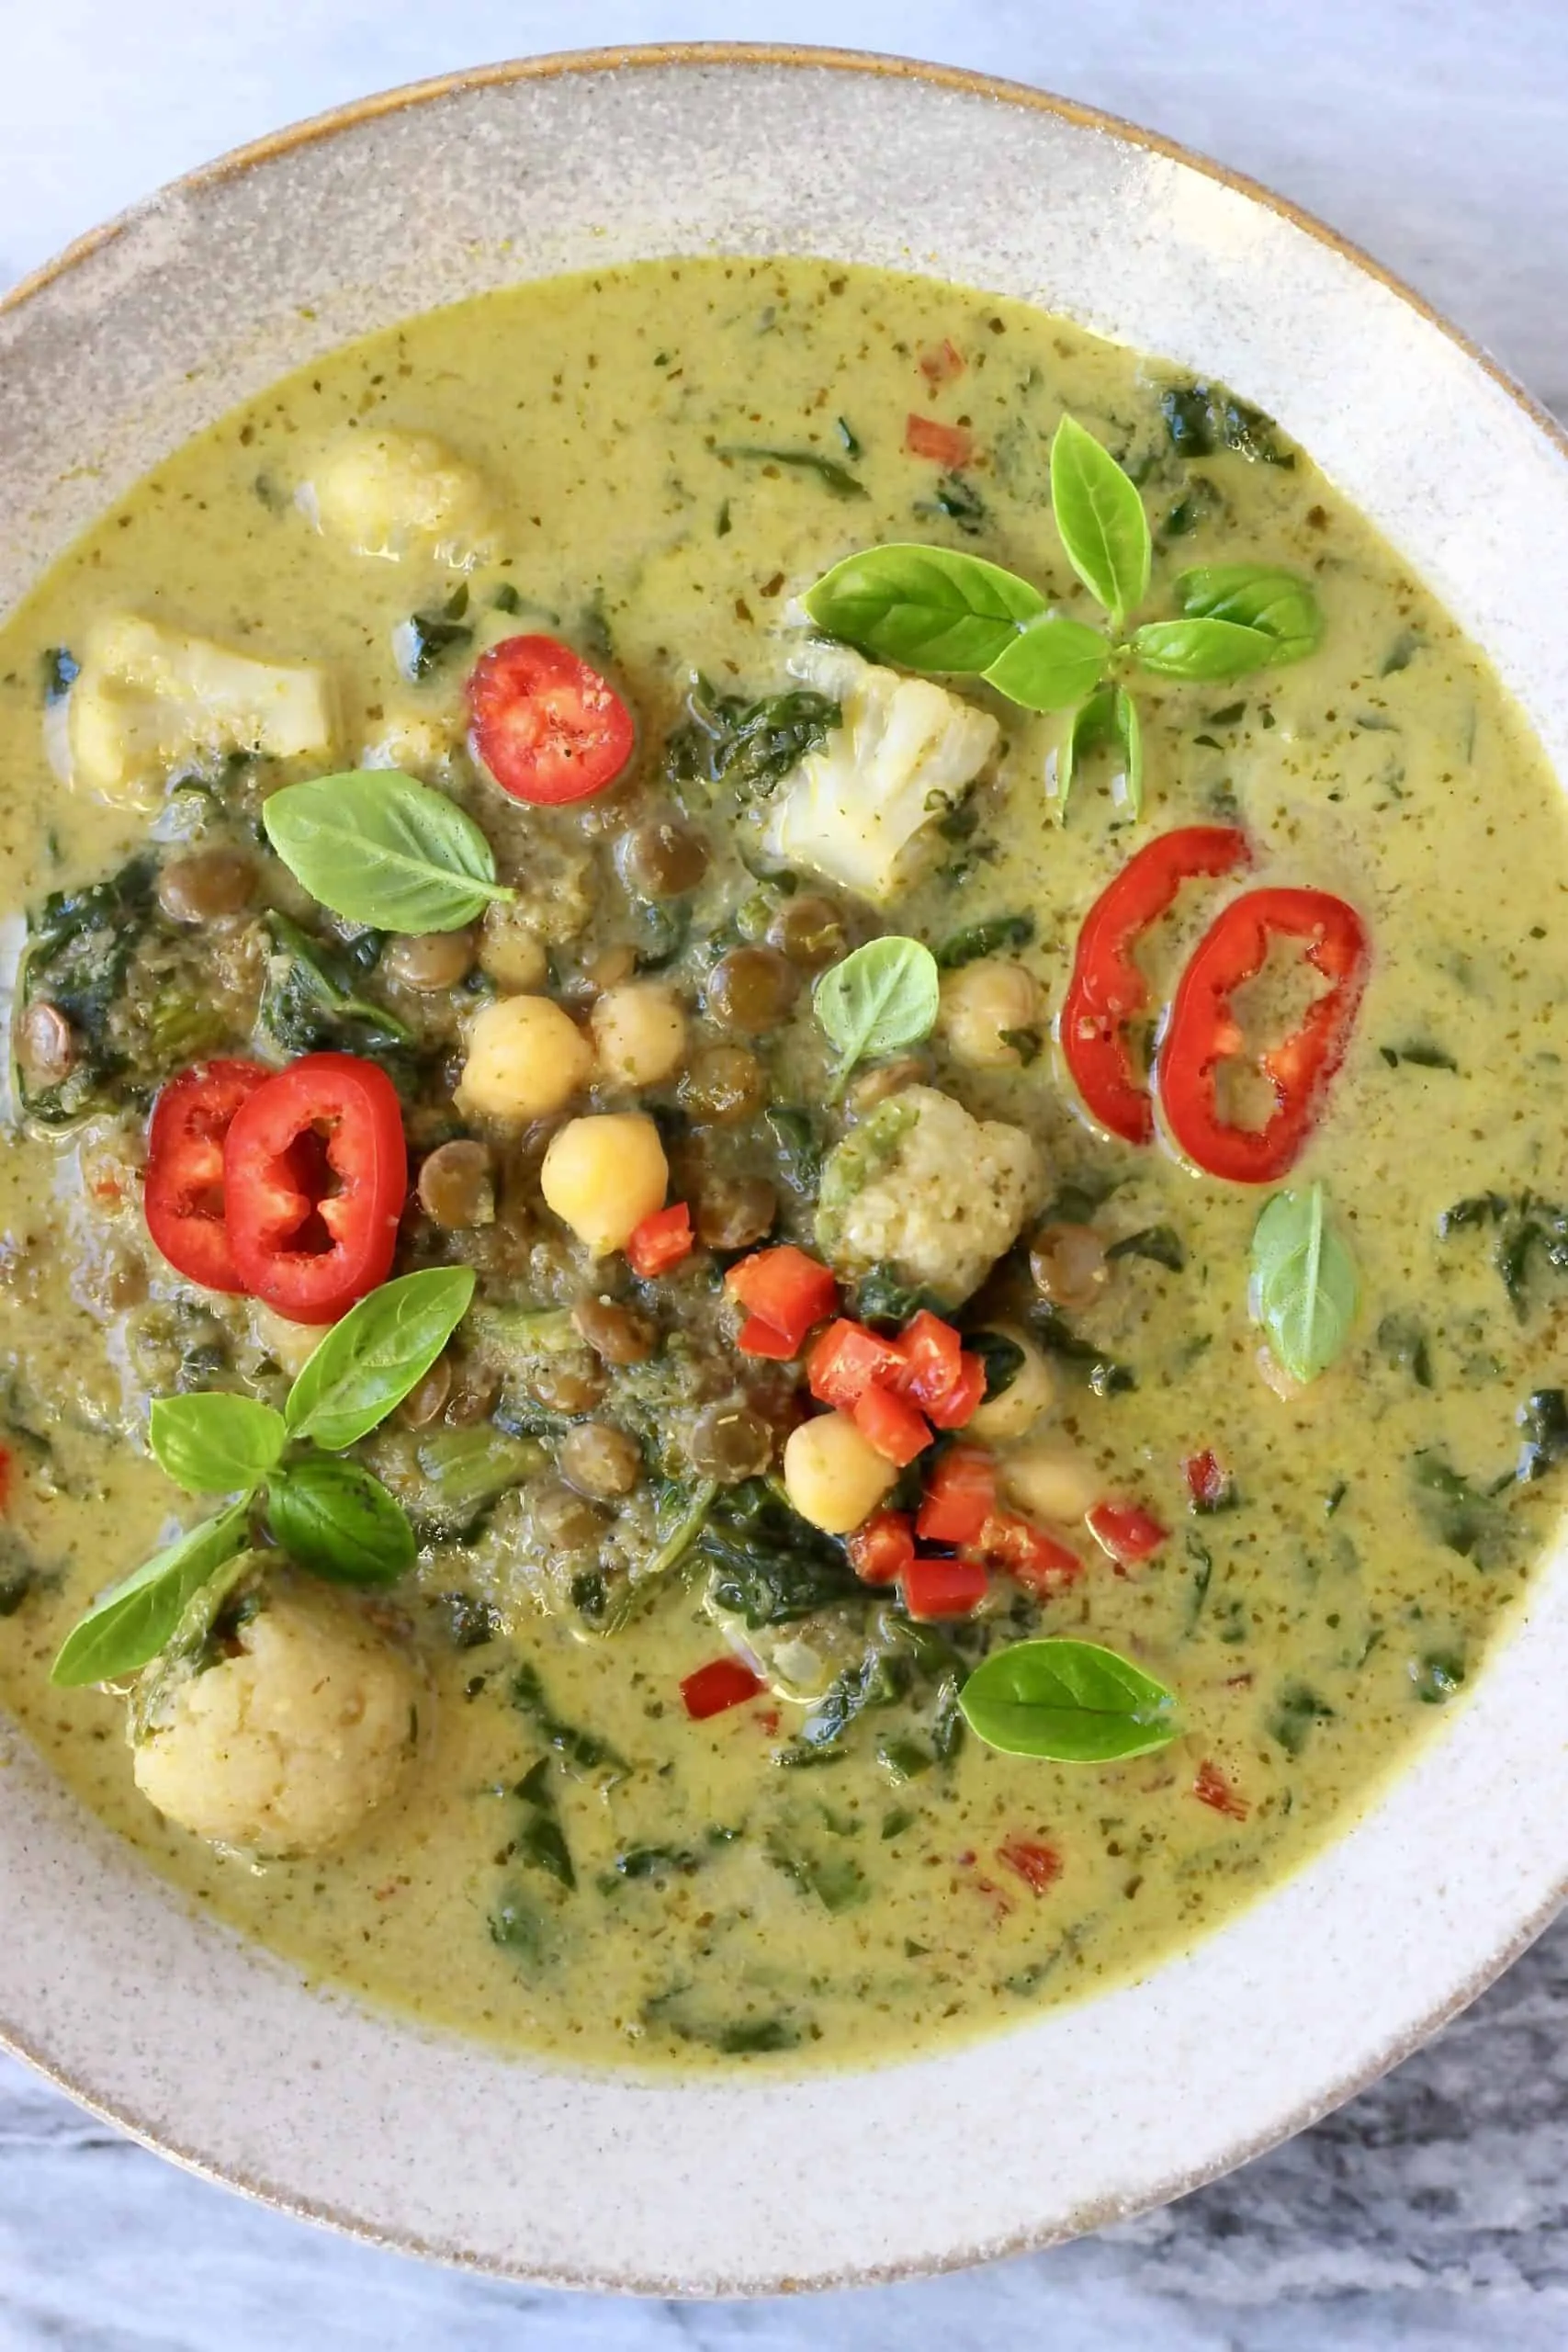 Vegan Thai green curry with chickpeas, lentils and vegetables